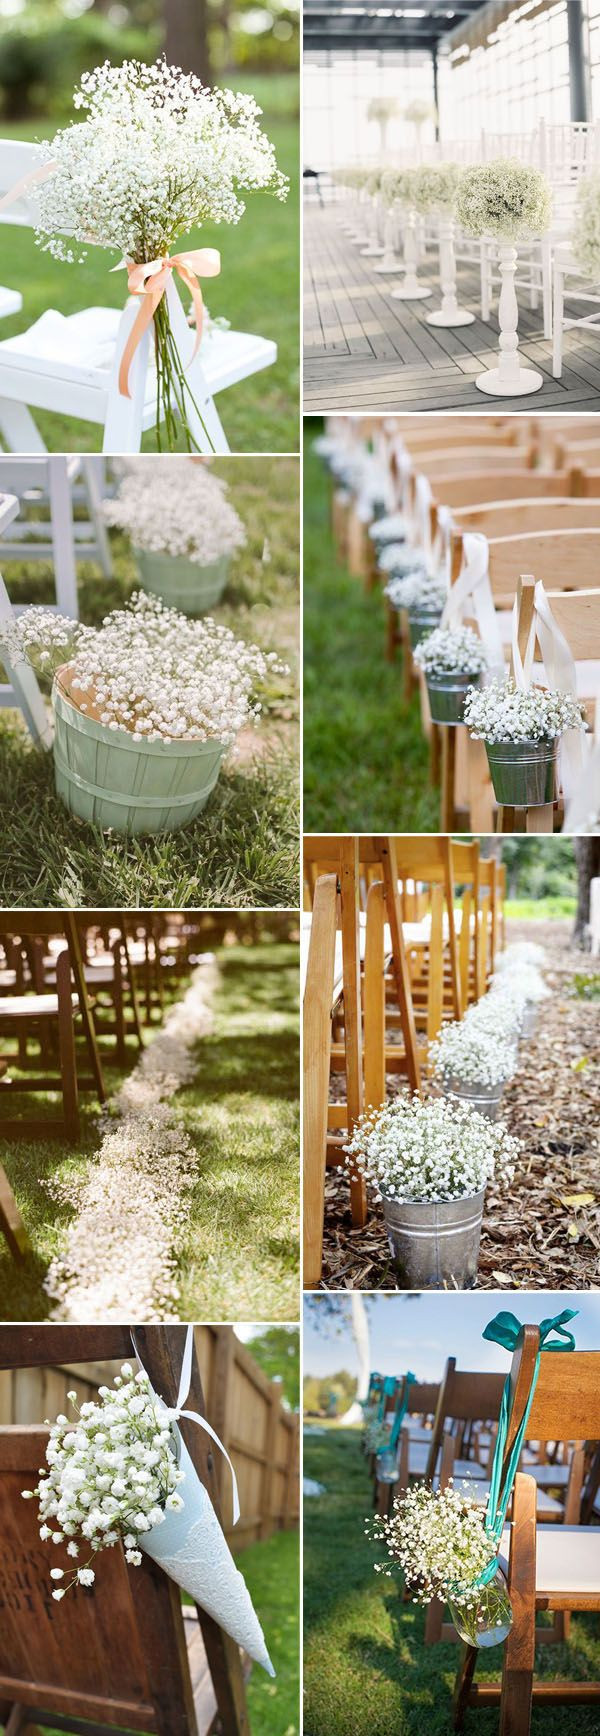 DIY Wedding Ceremony Decorations
 Save Your Bud on Weddings with 45 Baby’s Breath Ideas